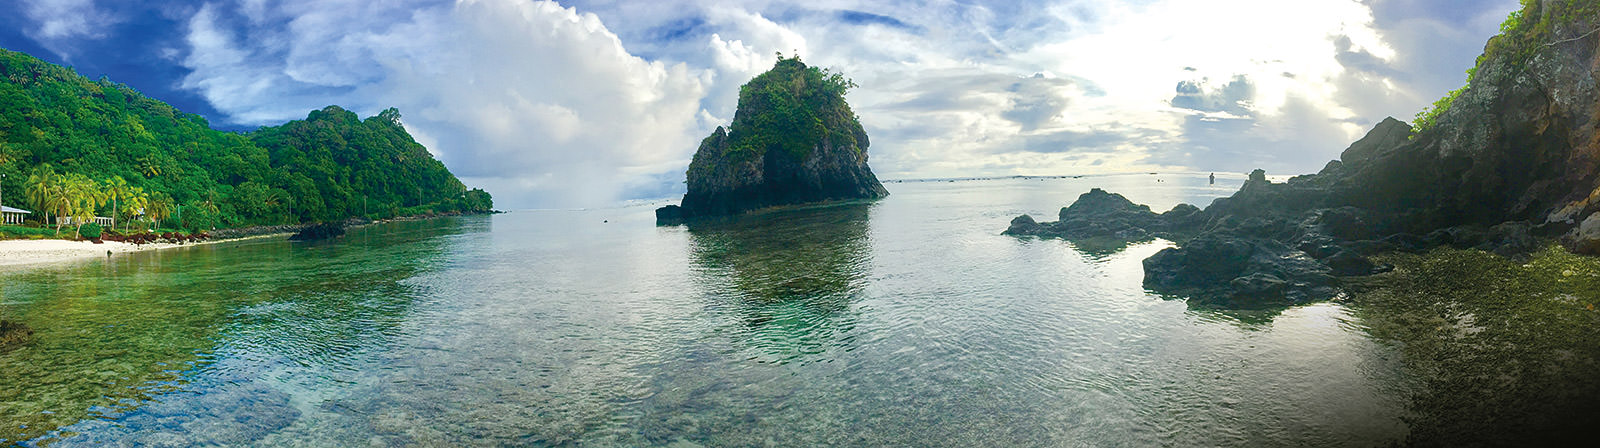 panoramic view from the shore of Ofu, the reef and cove are visible